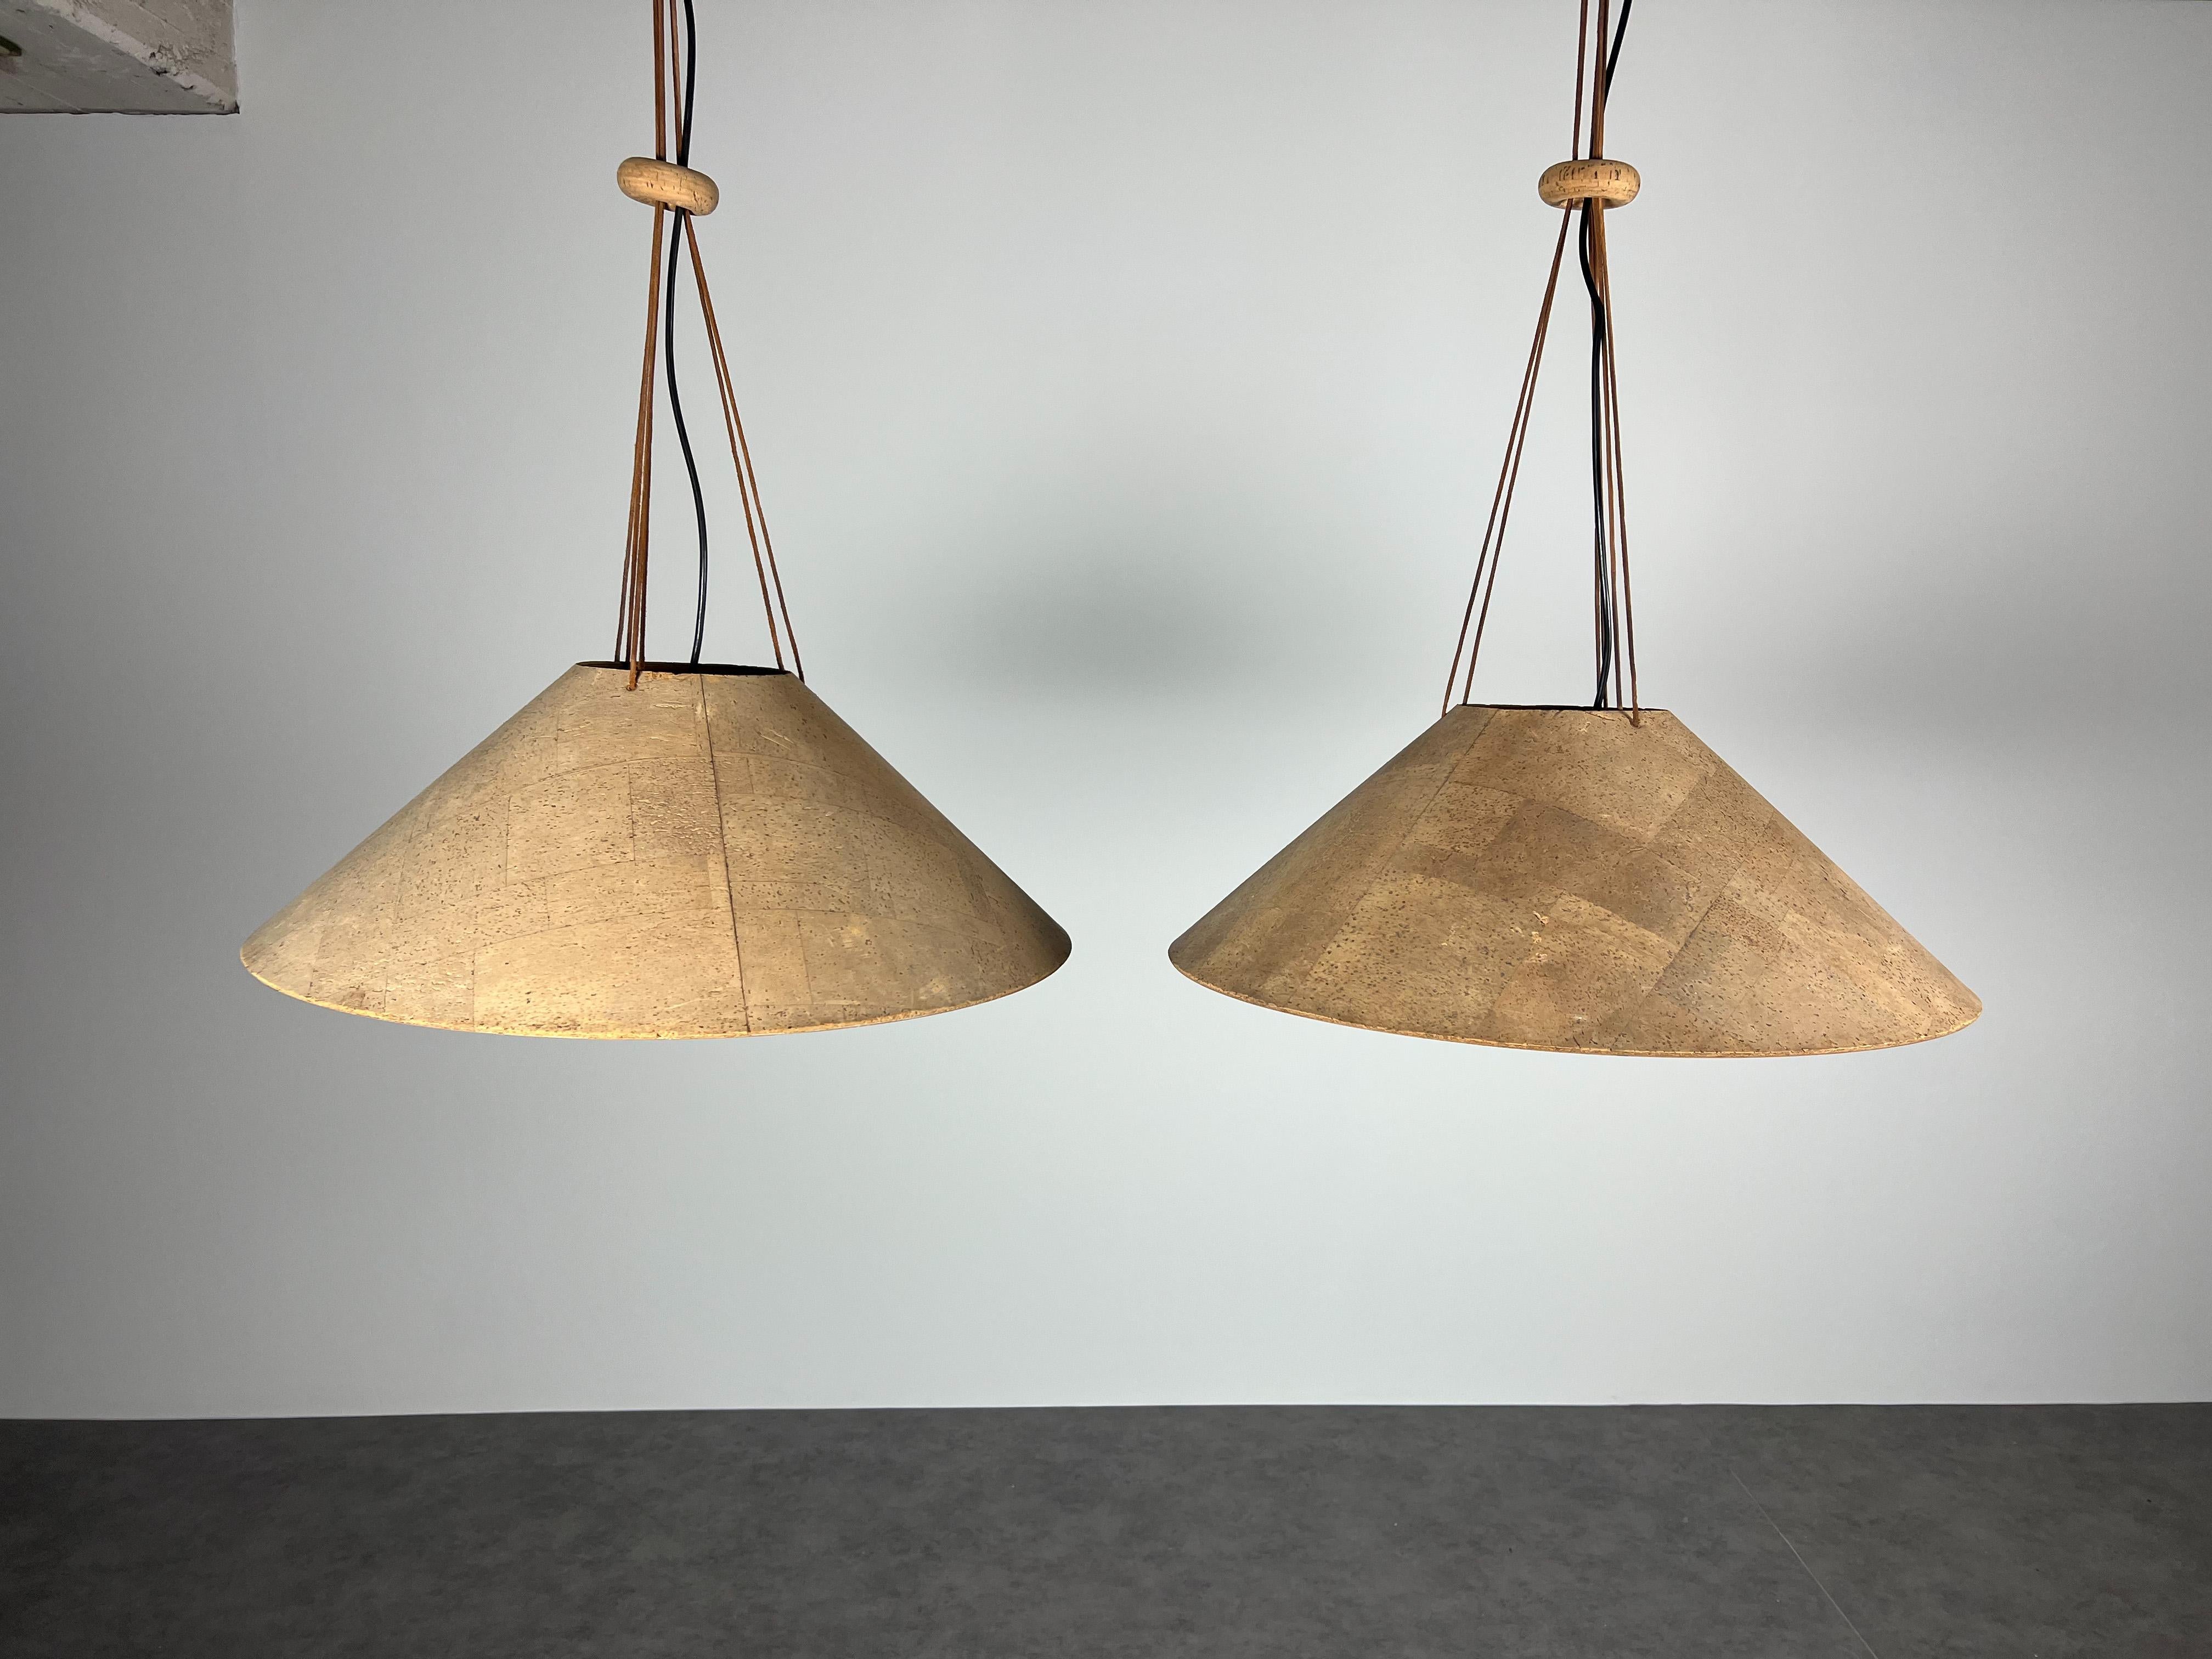 Unique worldwide set of two very rare Cork pendant lamps by Wilhelm Zannoth for M Design (Ingo Maurer).
Both Pendants are in original condition with light-brown laquered metal inner shade. The hight of the Lamps can be adjusted via the leather